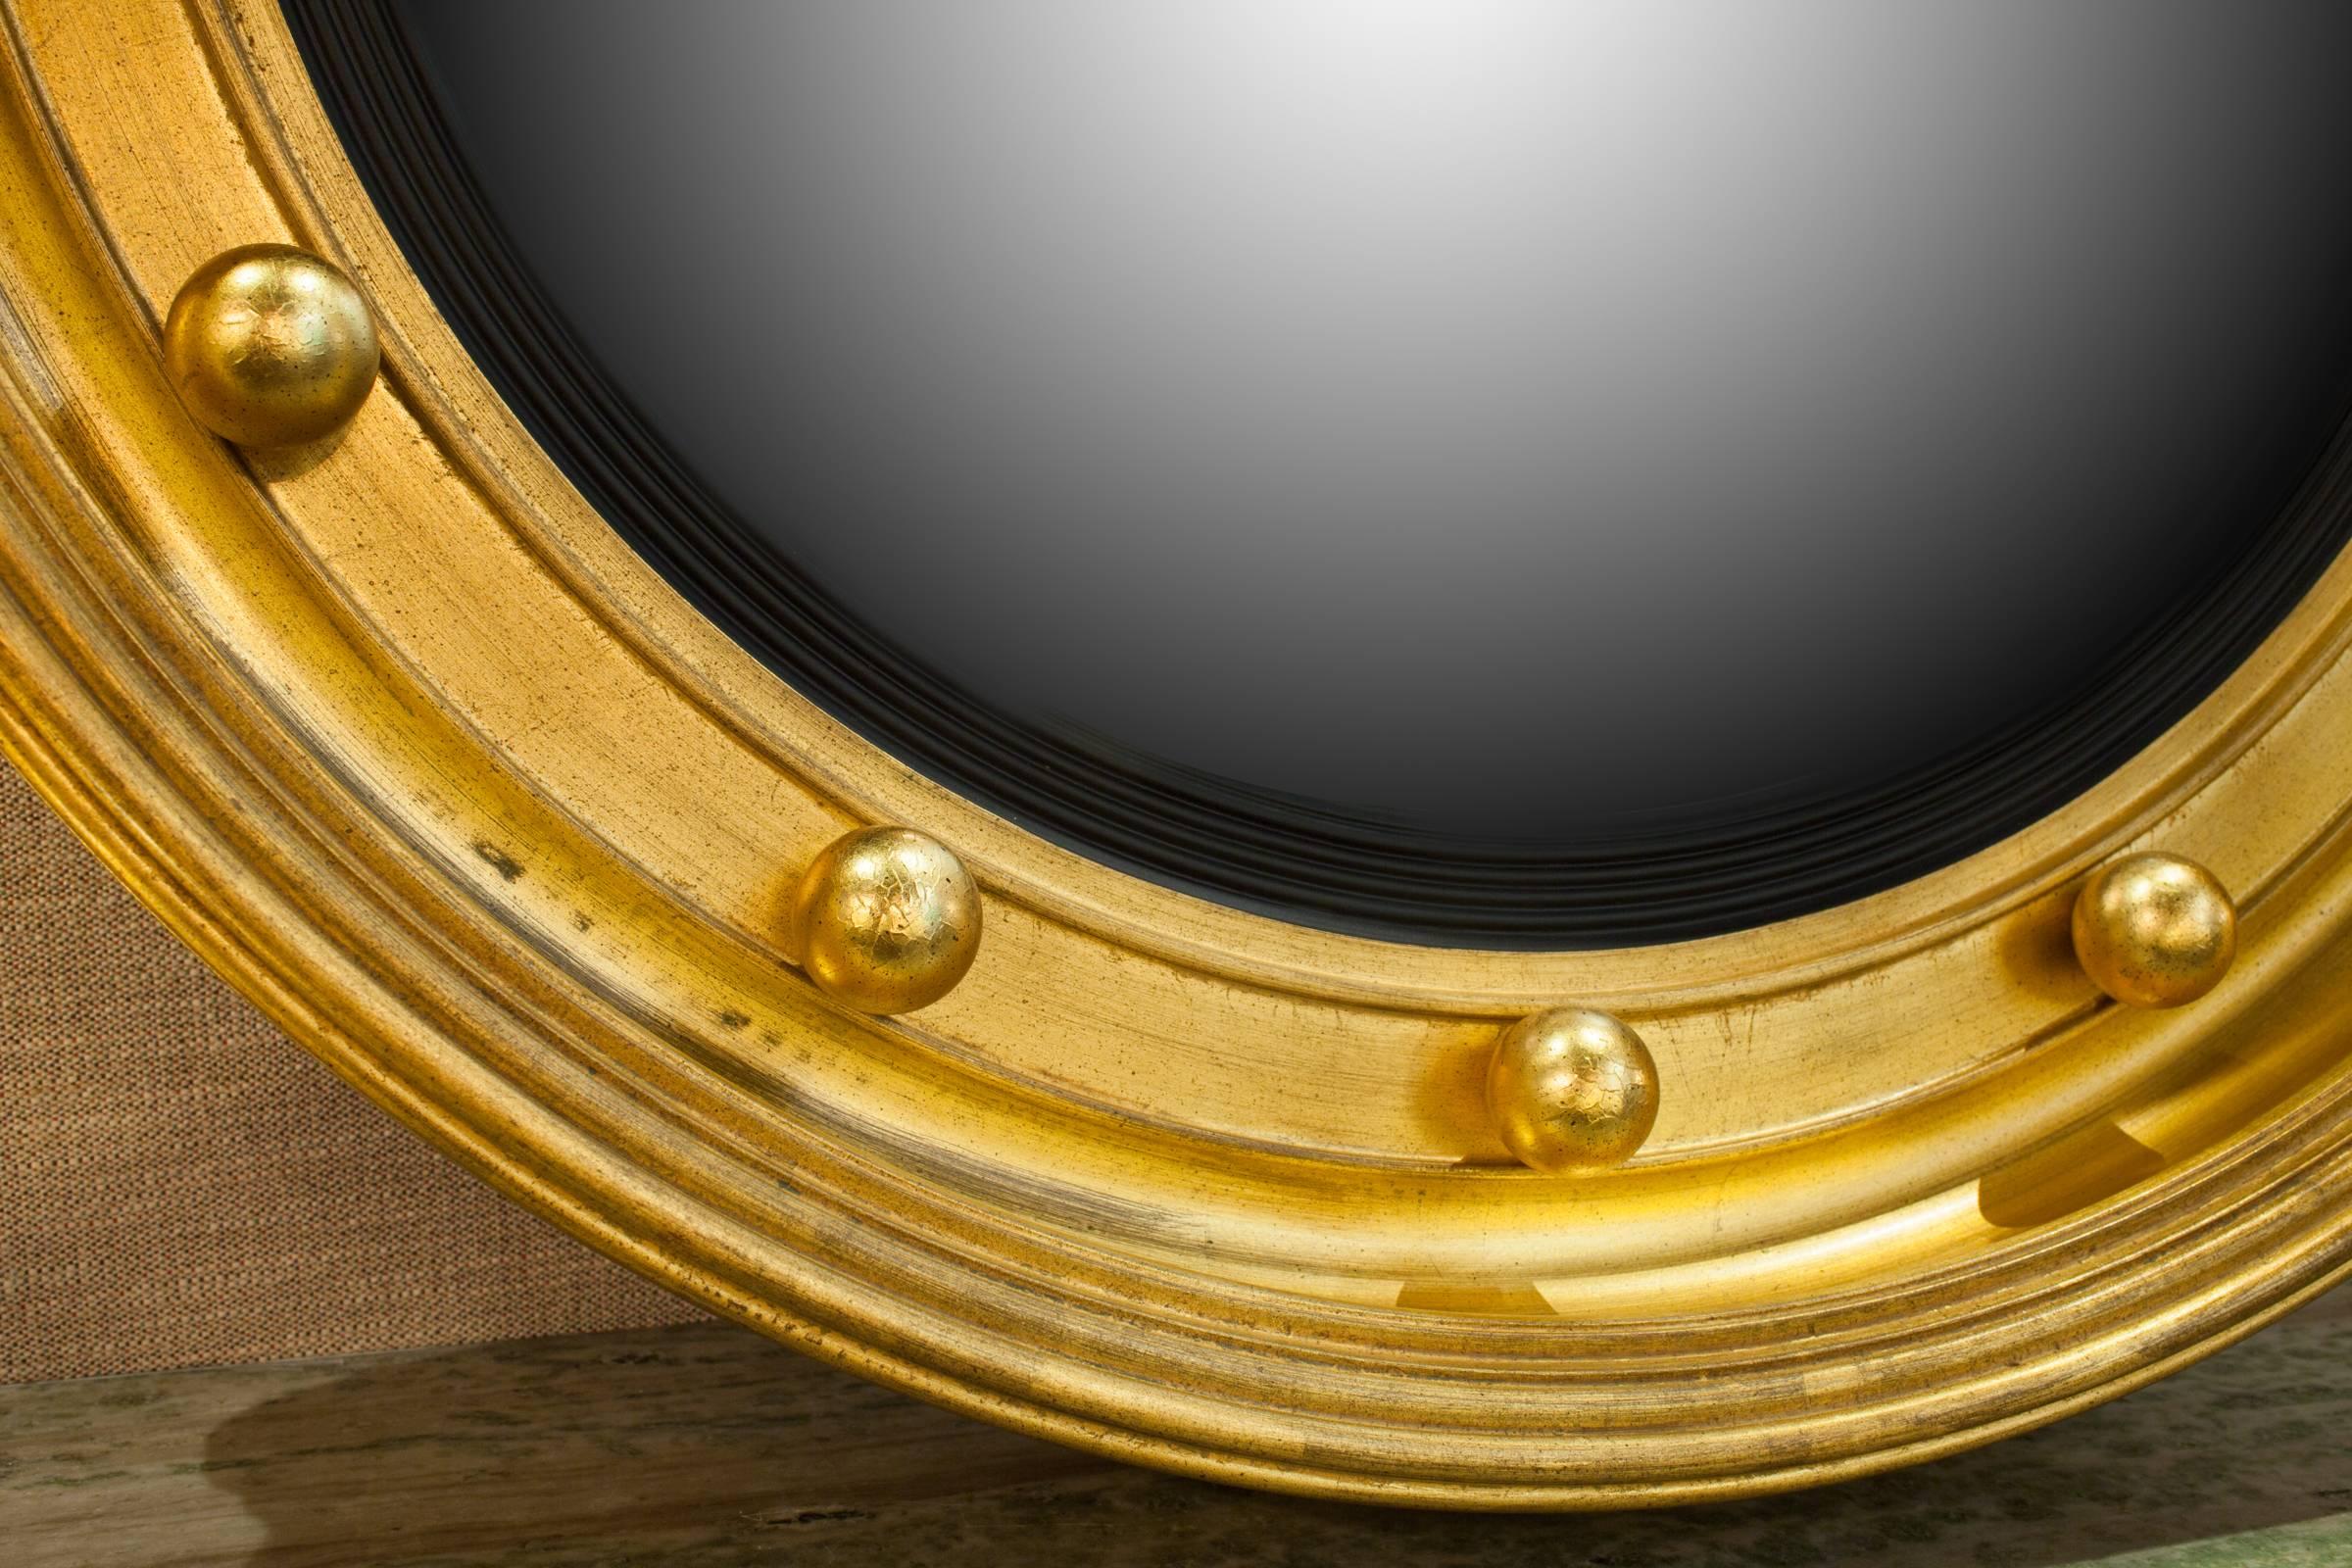 A very beefy vintage Federal style gold leafed bullseye mirror with convex glass set into a molded slip. The 13 gilt balls represent the 13 original colonial states. Some distressing in the silvering. Hand made and hand gold leafed.  Signed on the